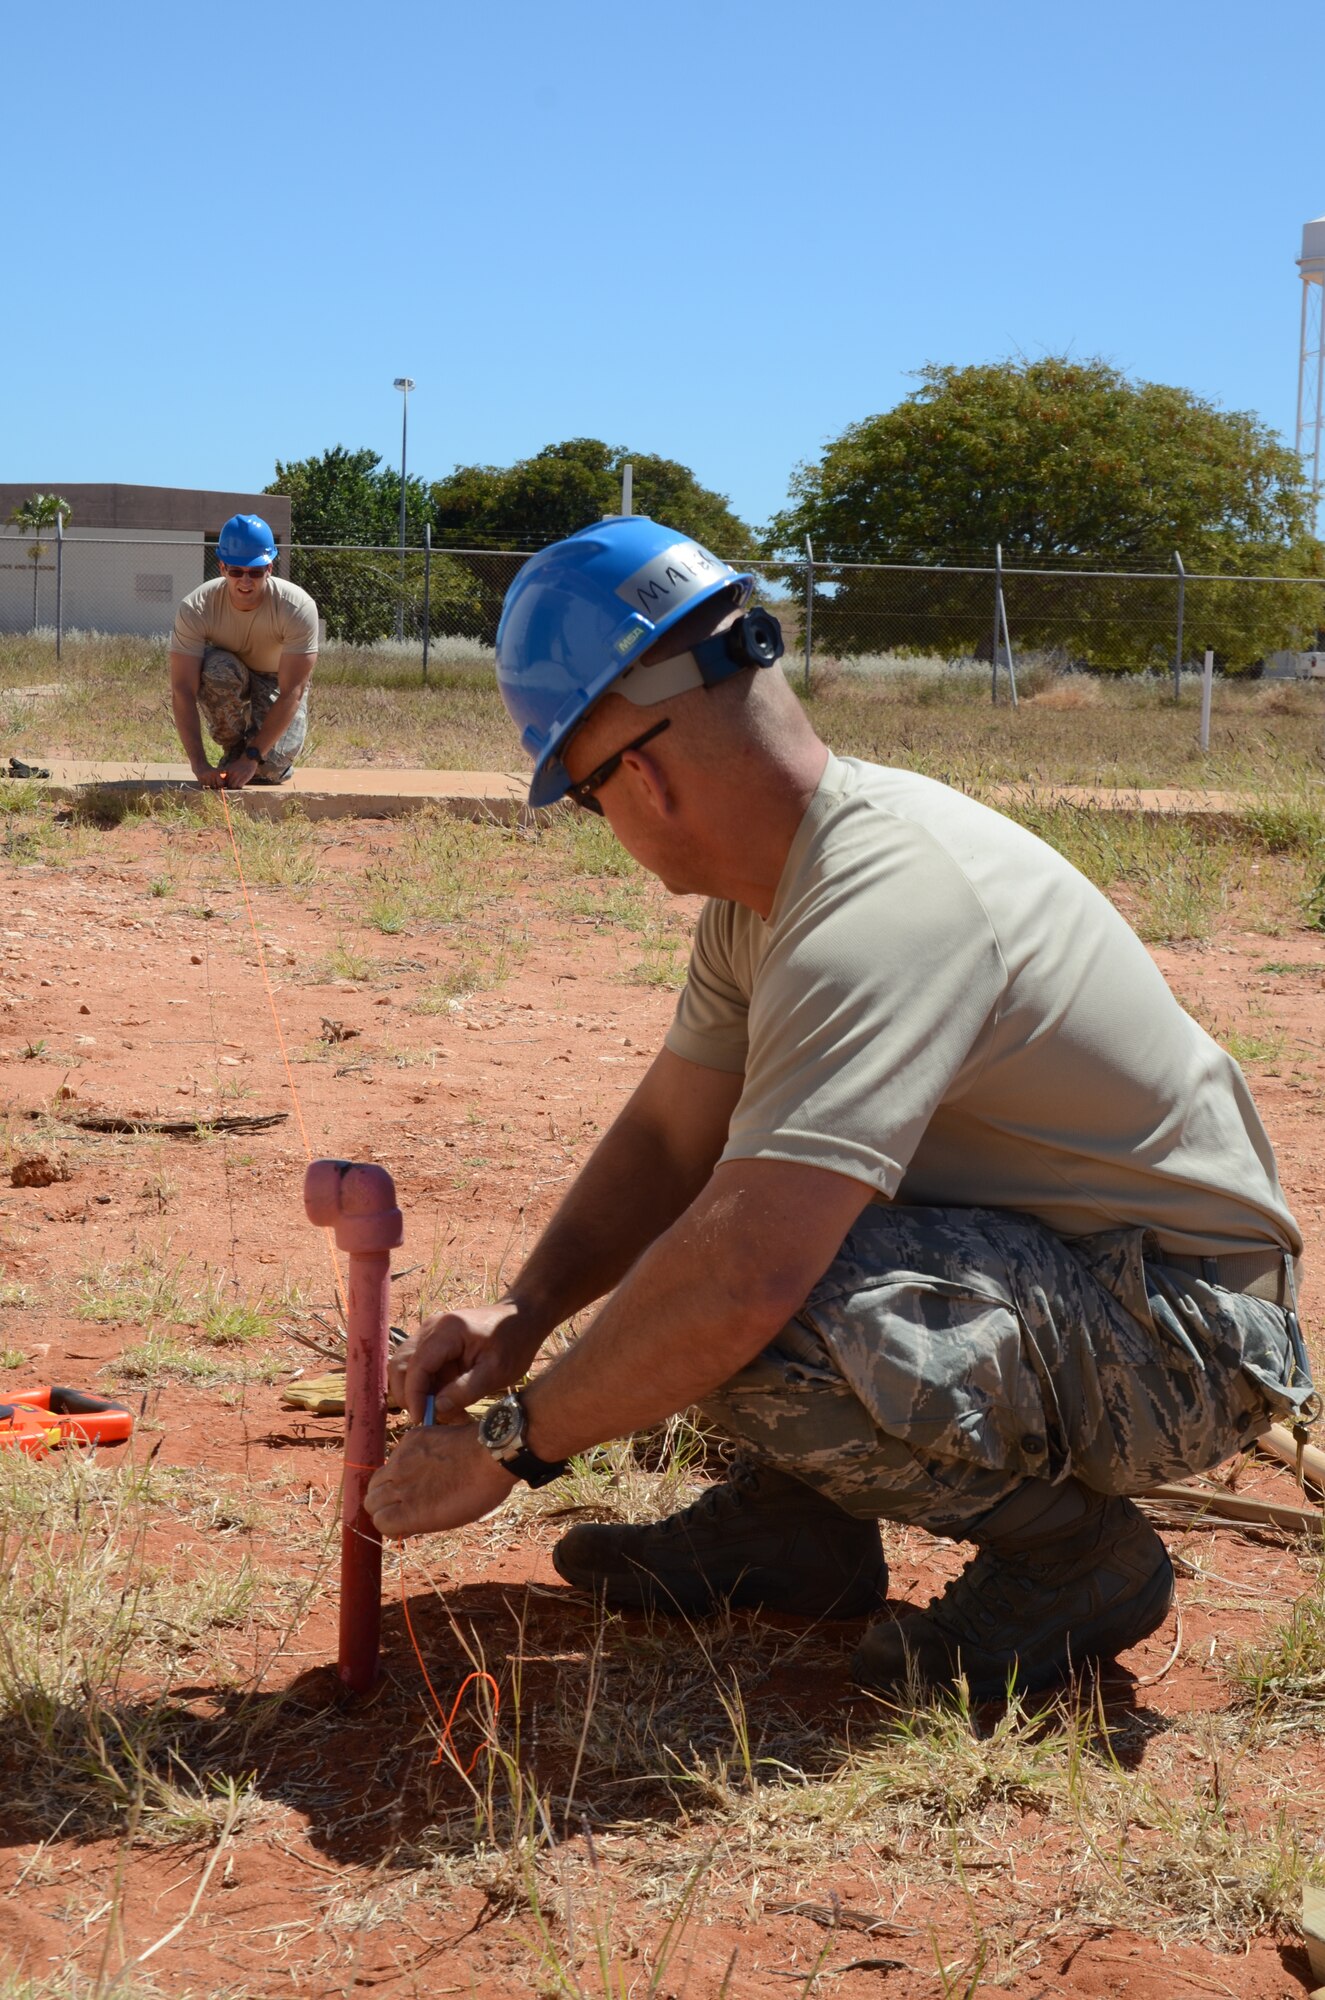 Tech. Sgt. Mike Maier, a native of Troy Ill., looks at Tech. Sgt. Joe Brakeville, a native and Alton Ill., while they make sure the surveying line is straight and level at Holt Naval Base Western Australia, Aug. 26, 2013. The 126th Civil Engineer Squadron members, attached to the 126th Air Refueling Wing, Illinois Air National Guard, performed surveying while installing a new facility for Operation C-Band Radar Pedestal And Structural NCS NE Holt- Western Australia that is being completed by multiple Air National Guard units. (Air National Guard photo by Airman 1st Class Elise Stout)